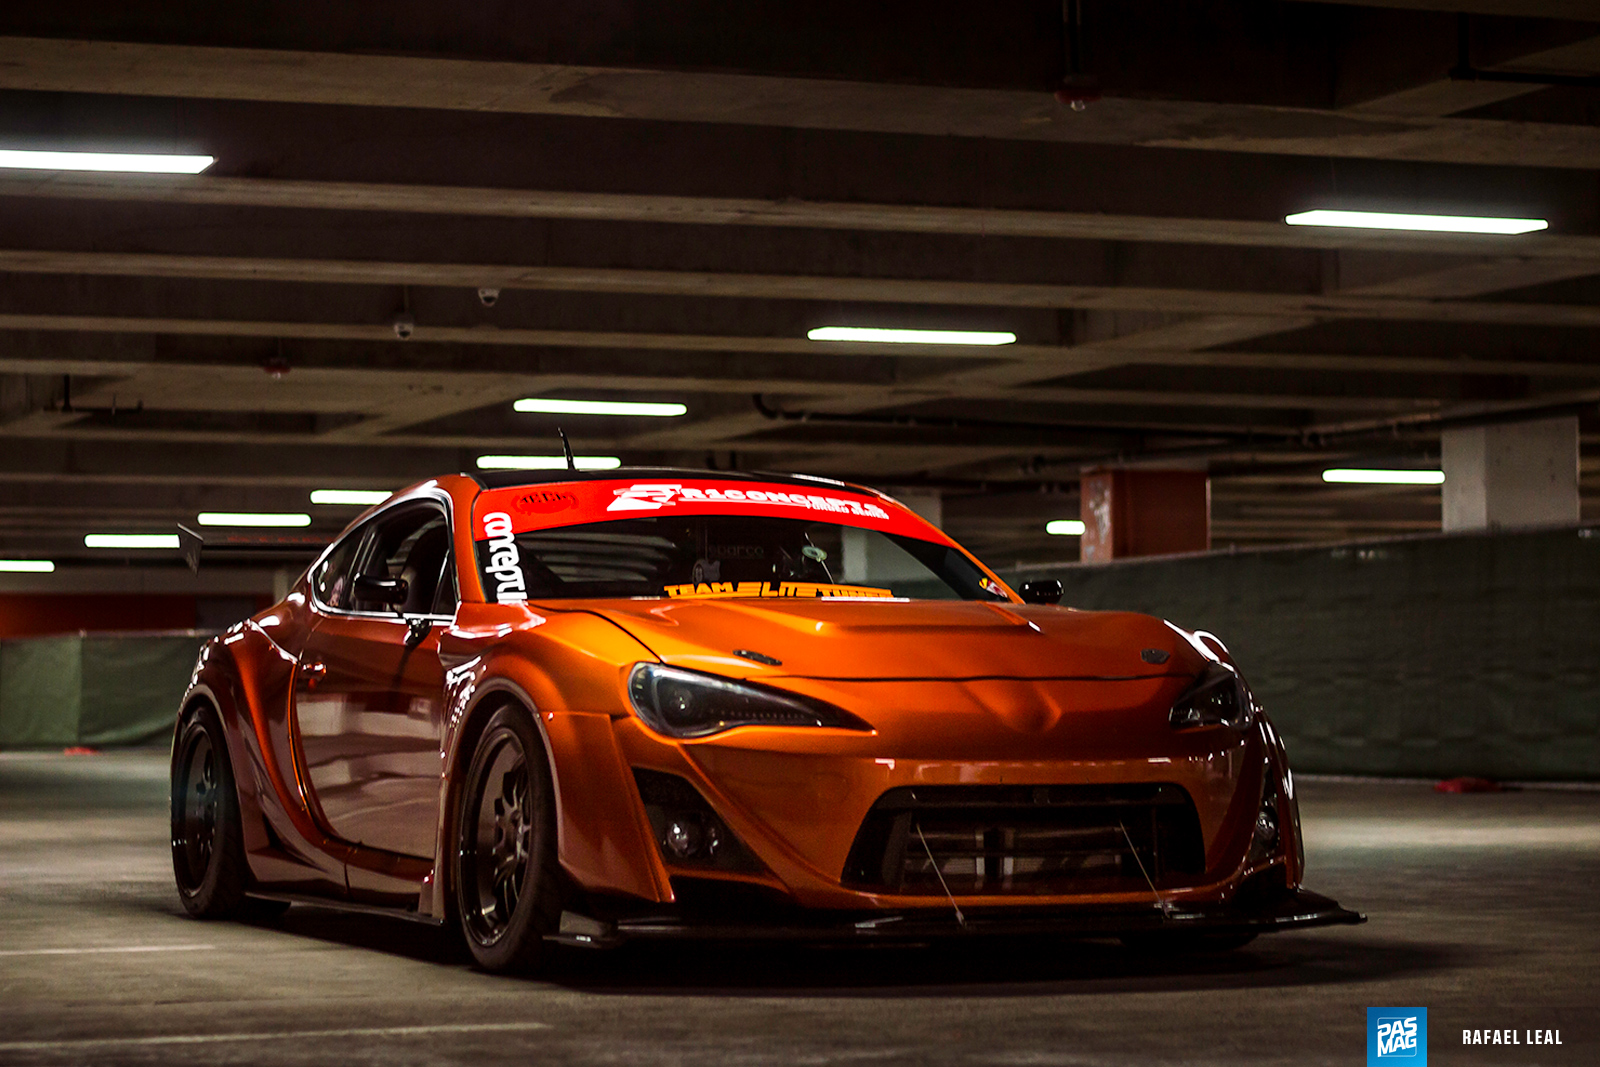 01 Rafael Leal 2013 Scion FRS pasmag builds to follow